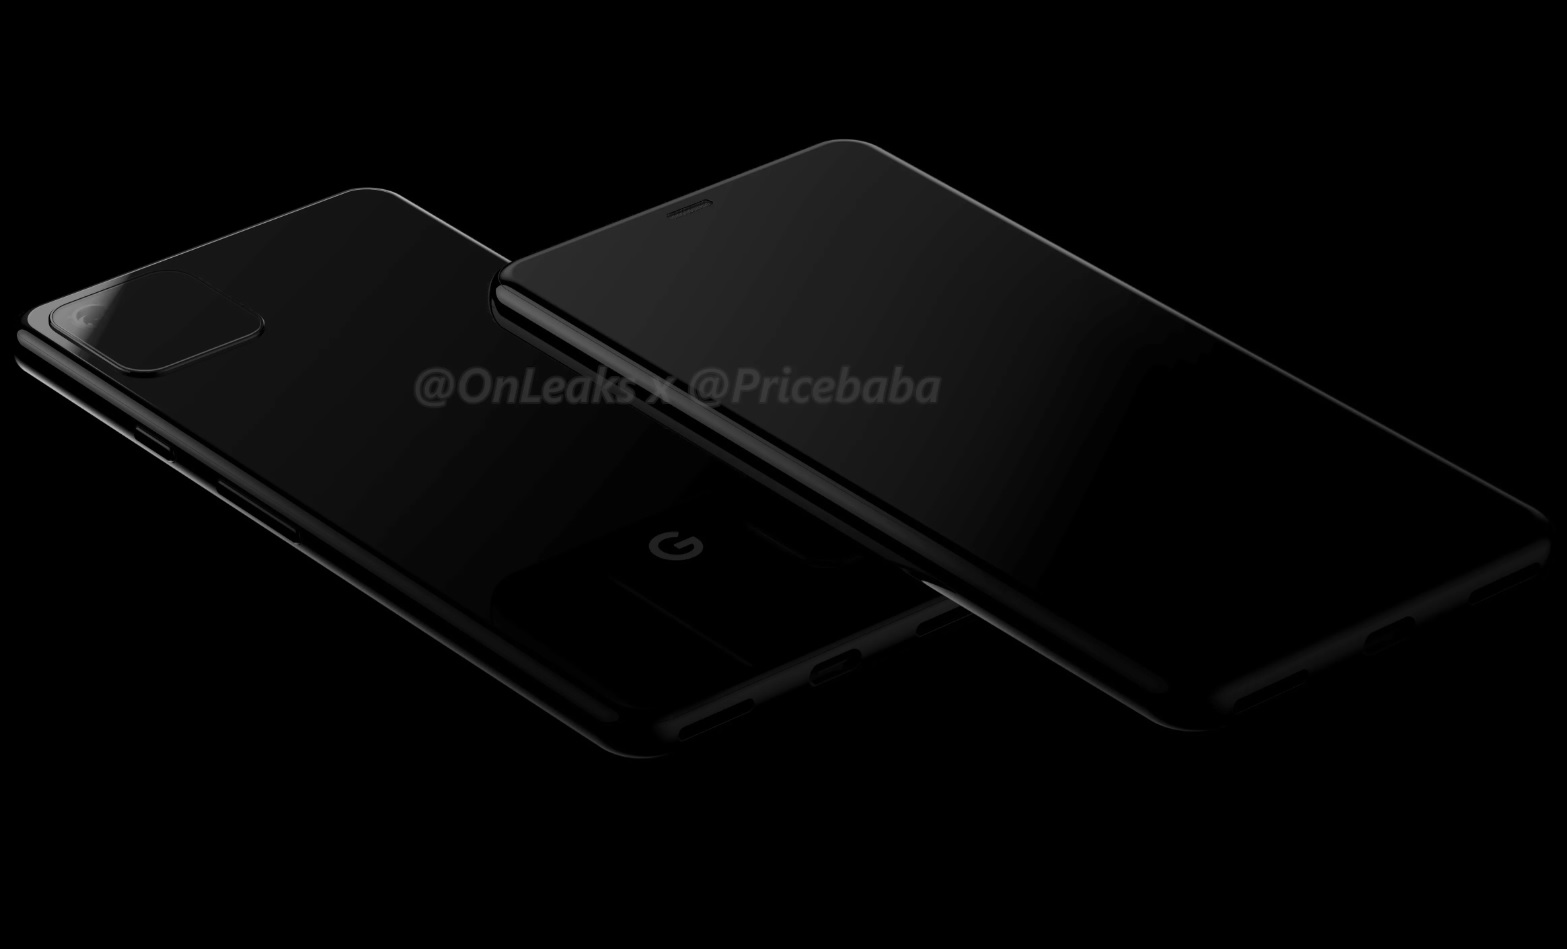 Leaked renders of what is supposedly the Google Pixel 4.